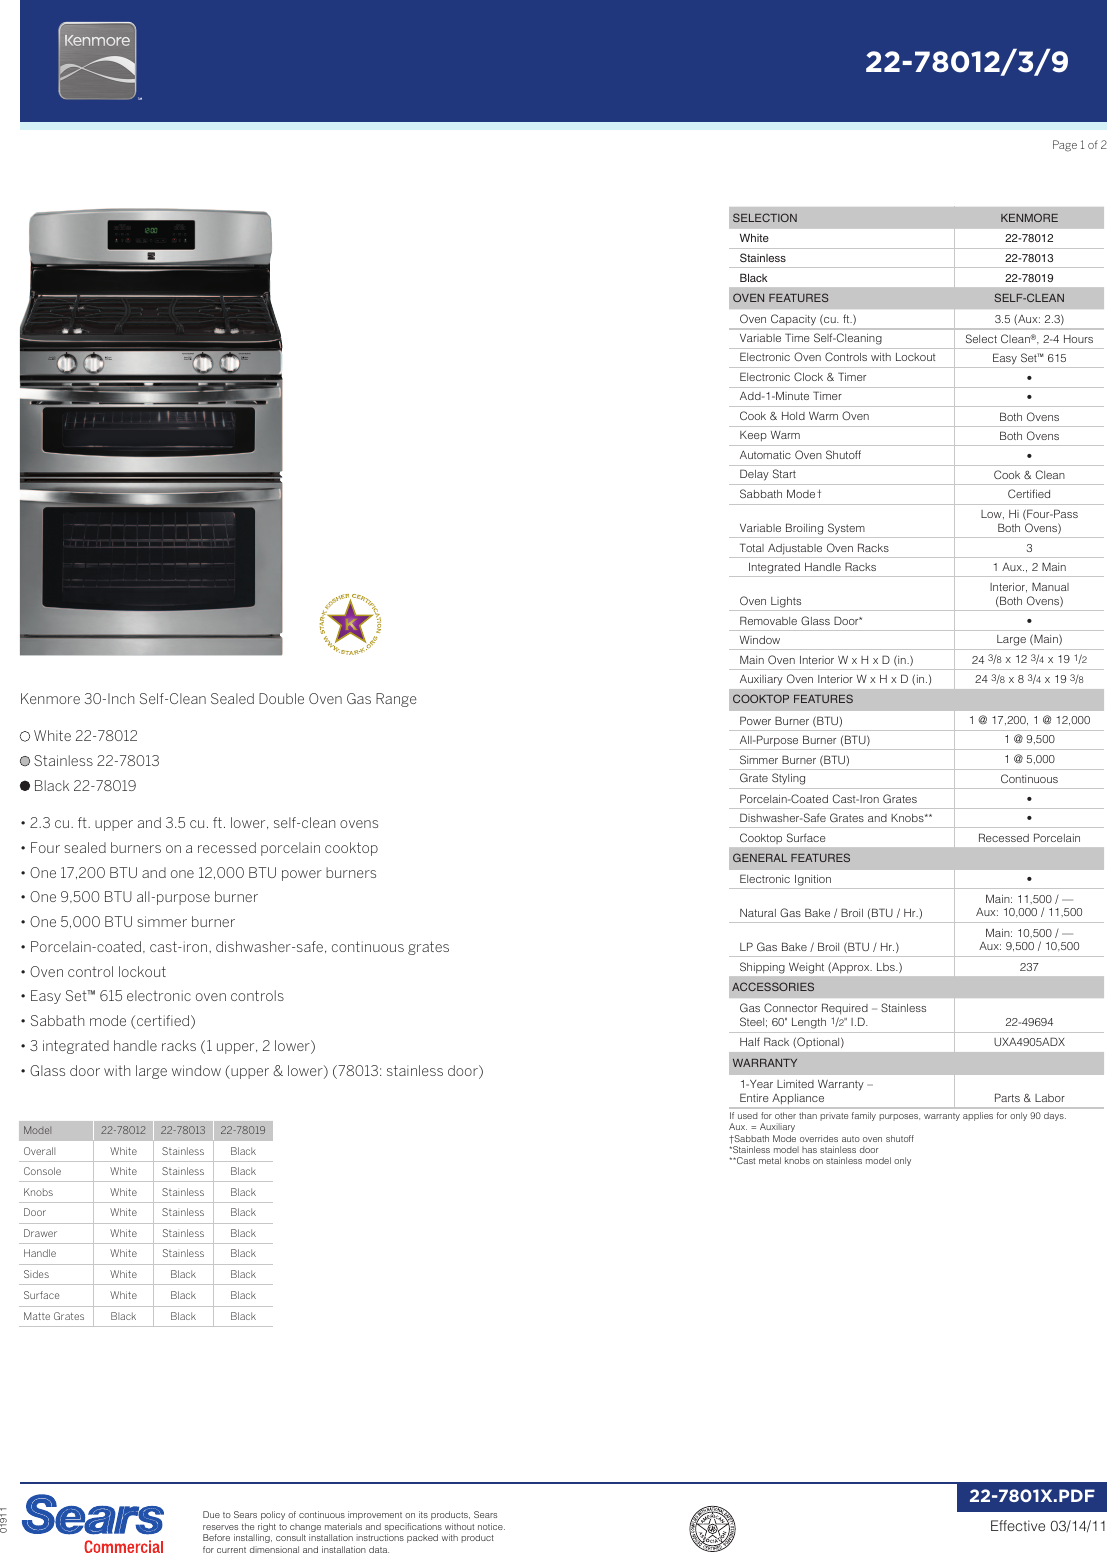 Page 1 of 2 - Kenmore Kenmore-Kenmore-5-8-Cu-Ft-Double-Oven-Gas-Range-Specifications-  Kenmore-kenmore-5-8-cu-ft-double-oven-gas-range-specifications